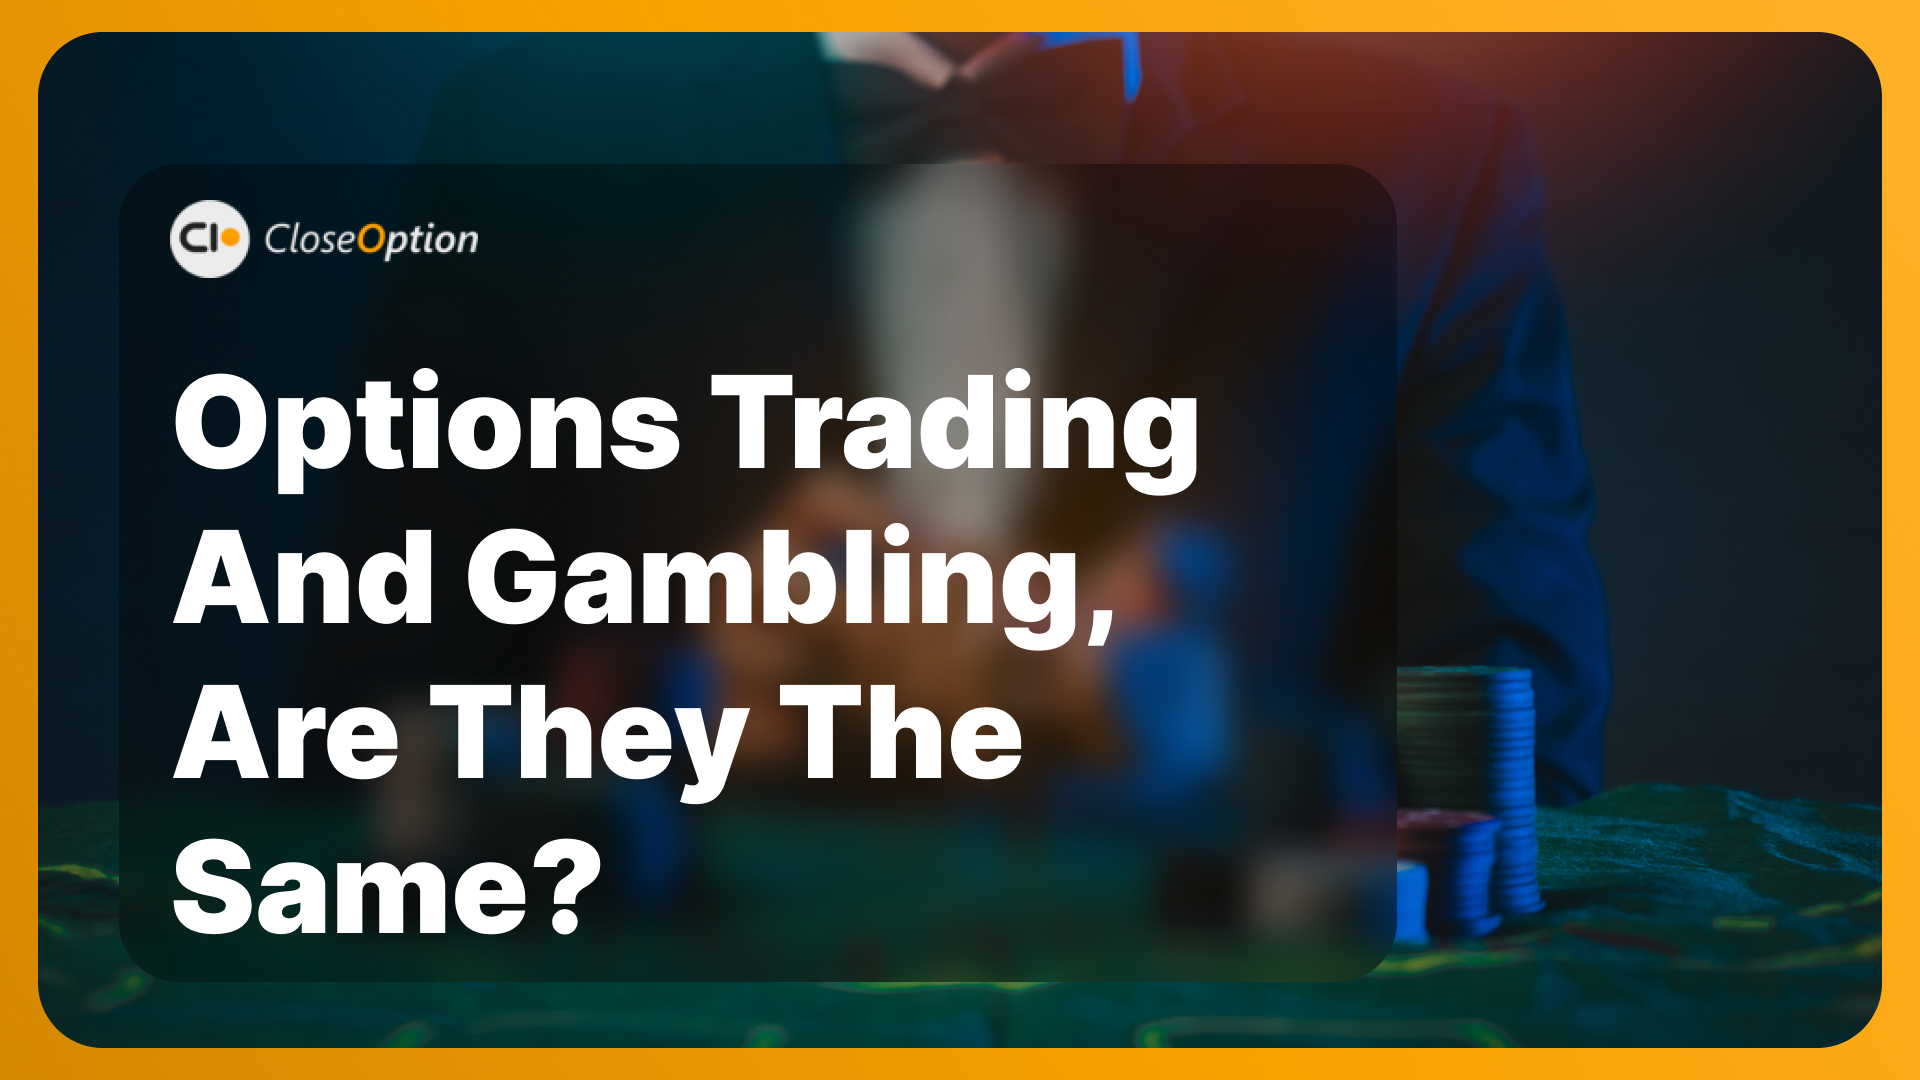 Options Trading and Gambling: Are They the Same?